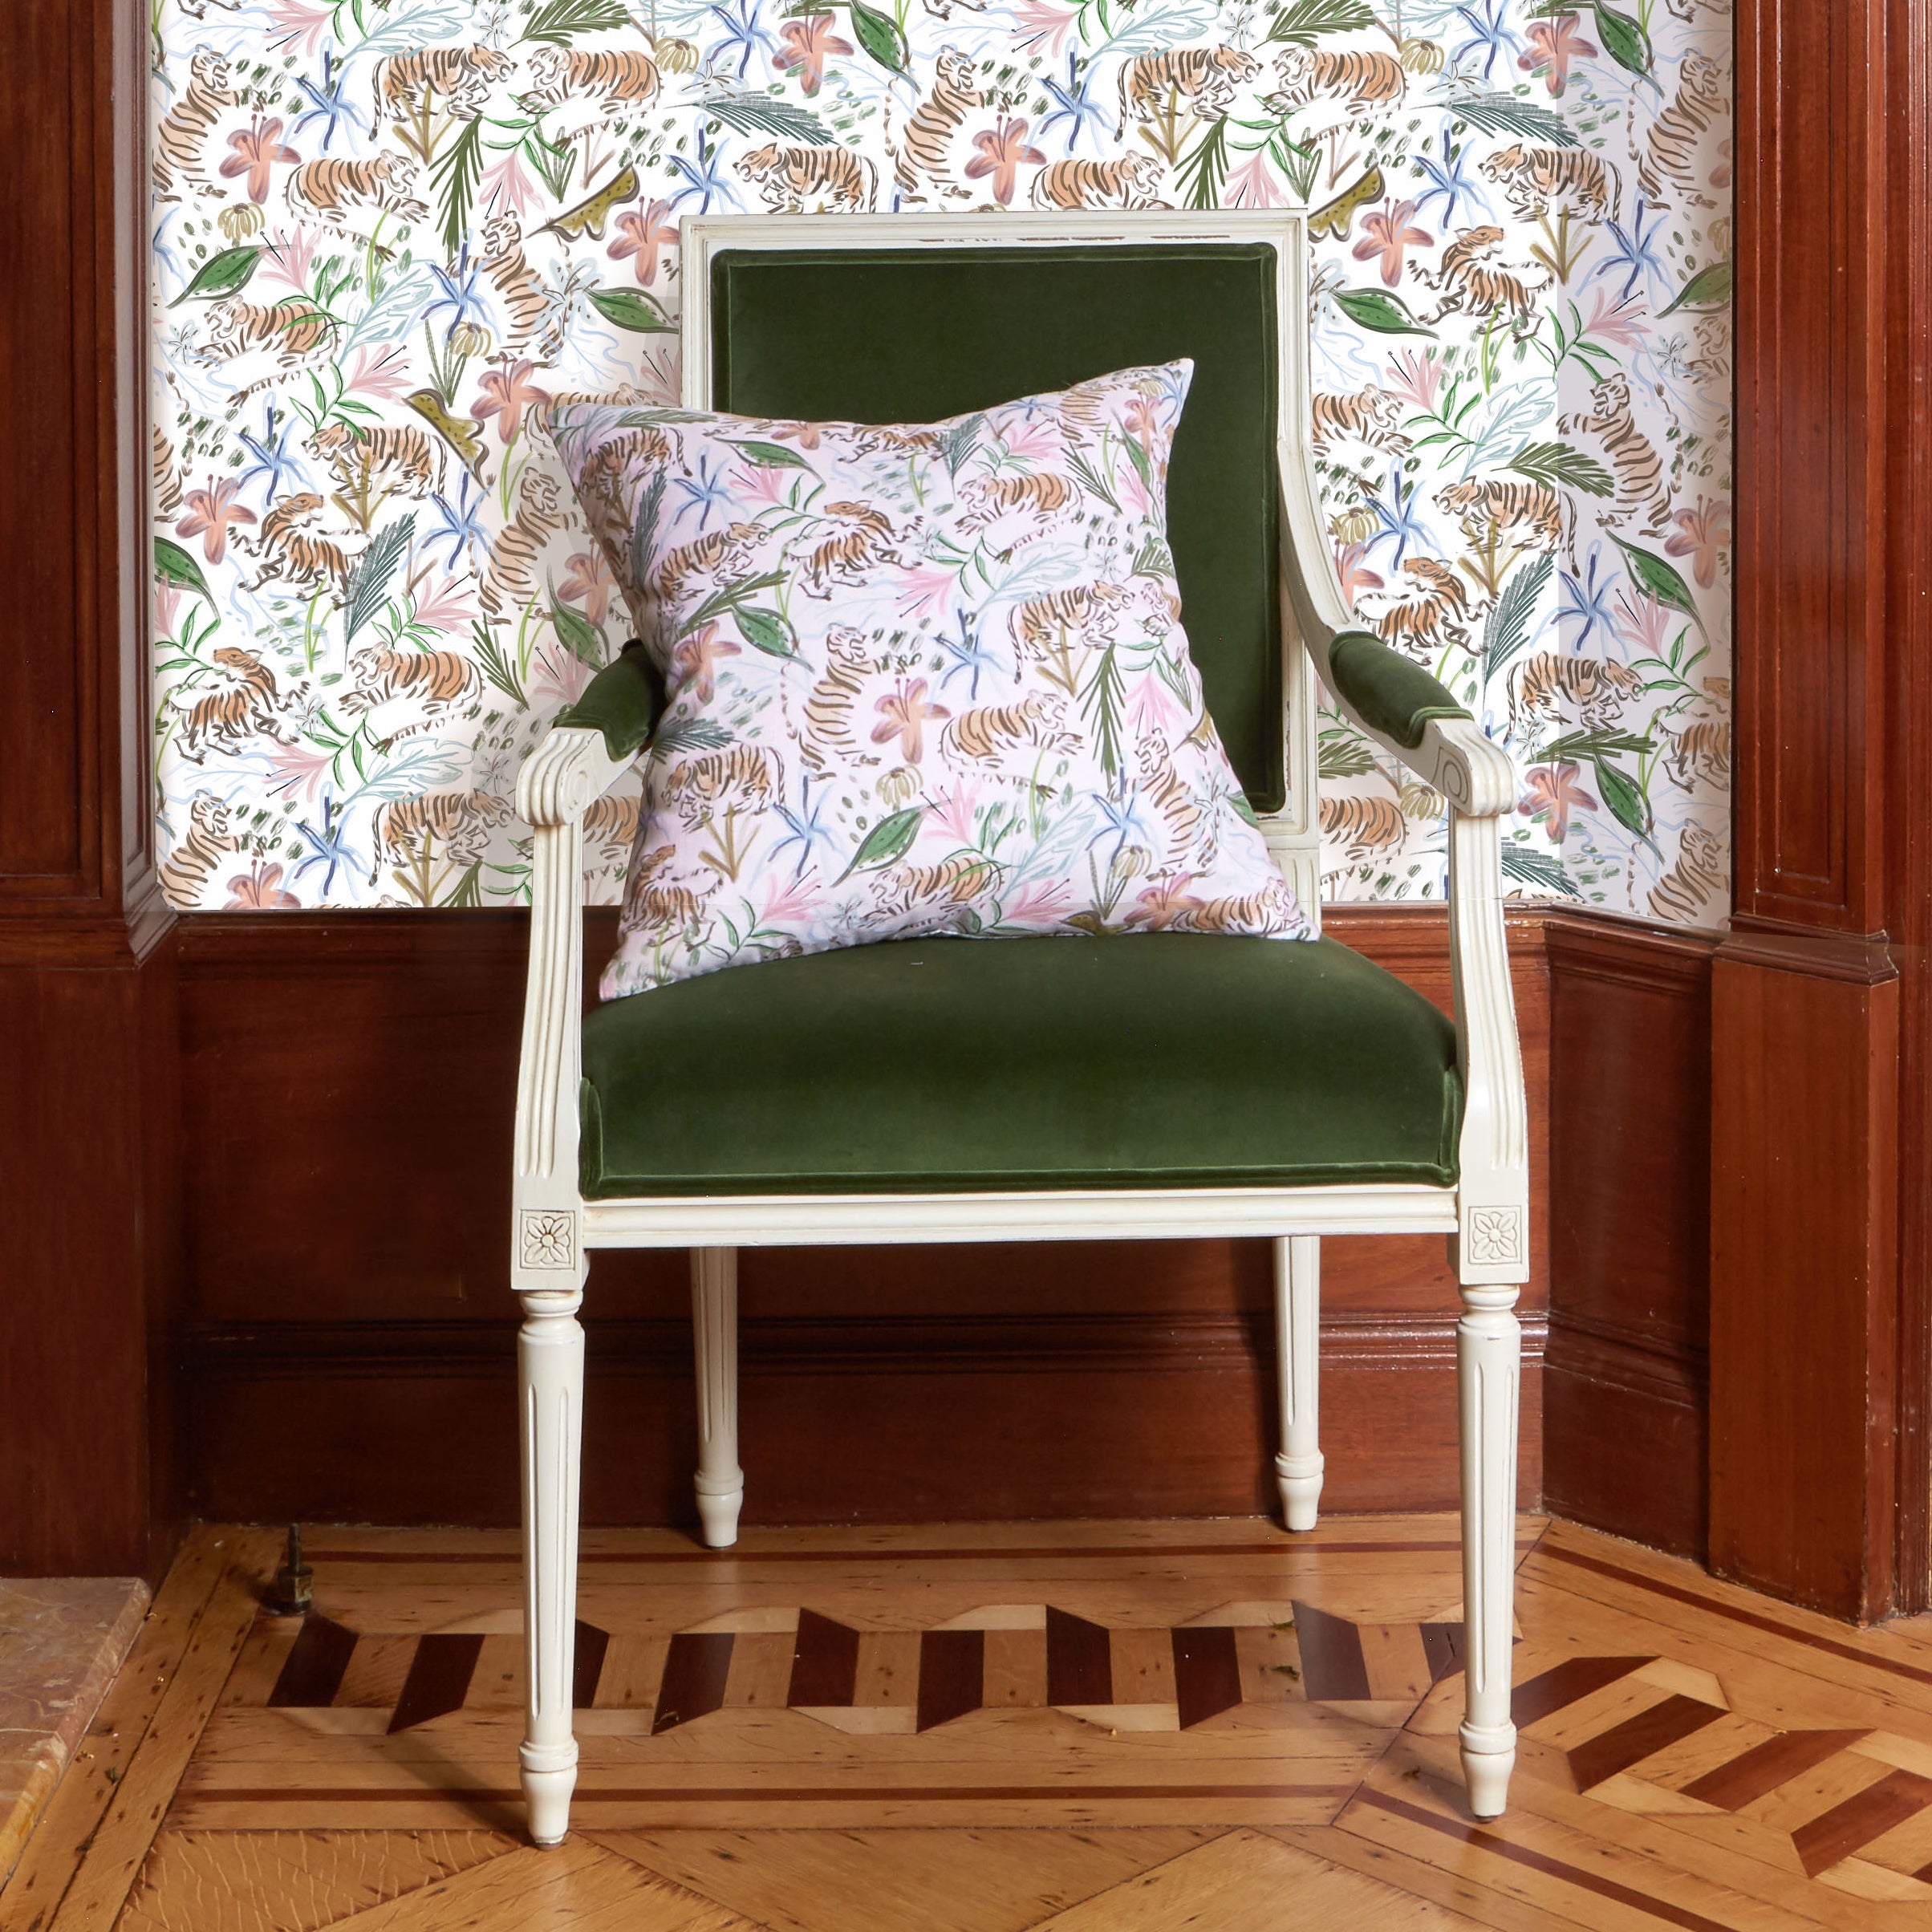 Corner Close-Up with Pink Chinoiserie Tiger Printed Wallpaper with Pink Chinoiserie Tiger Printed Pillow on Fern Green Velvet Chair in the front